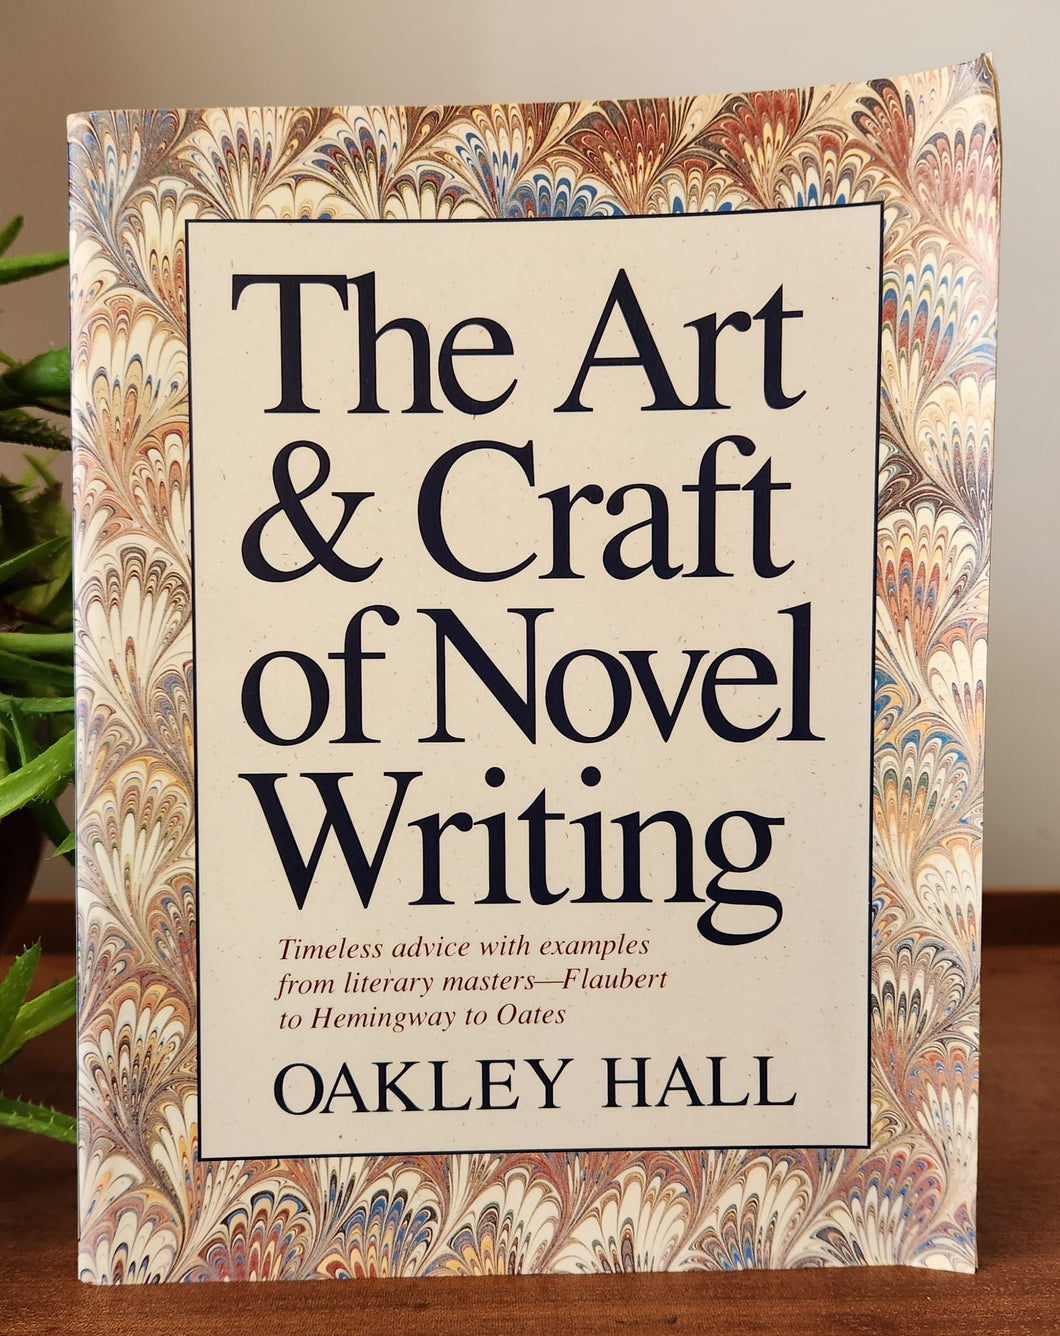 The Art and Craft of Novel Writing by Oakley Hall